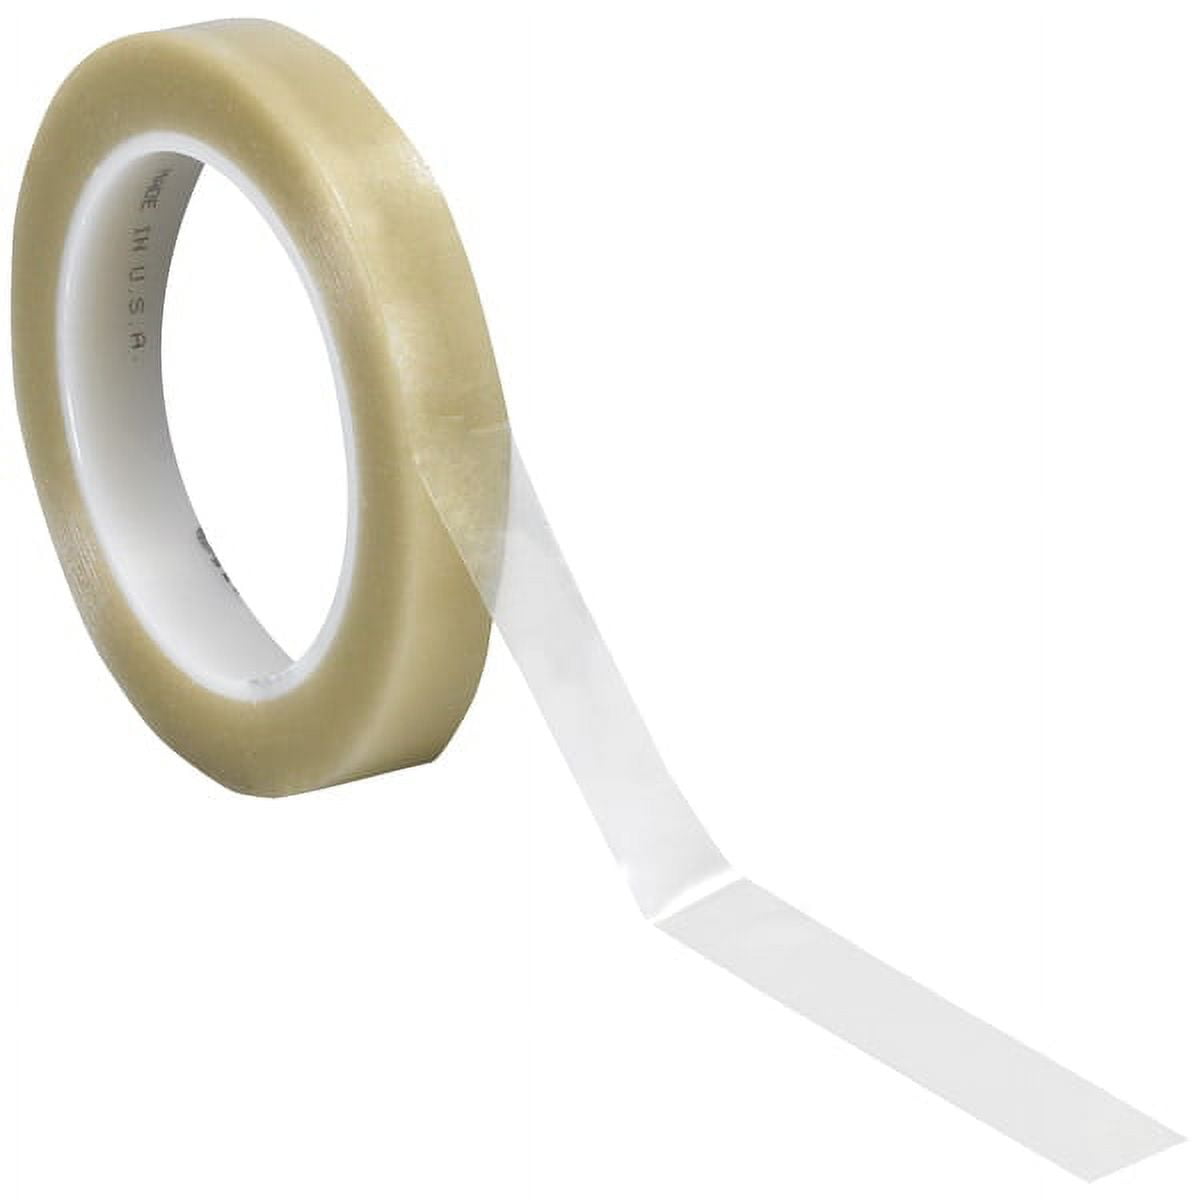 T963471c 0.50 In. X 36 Yards Clear 471 Vinyl Tape, Clear - Case Of 72